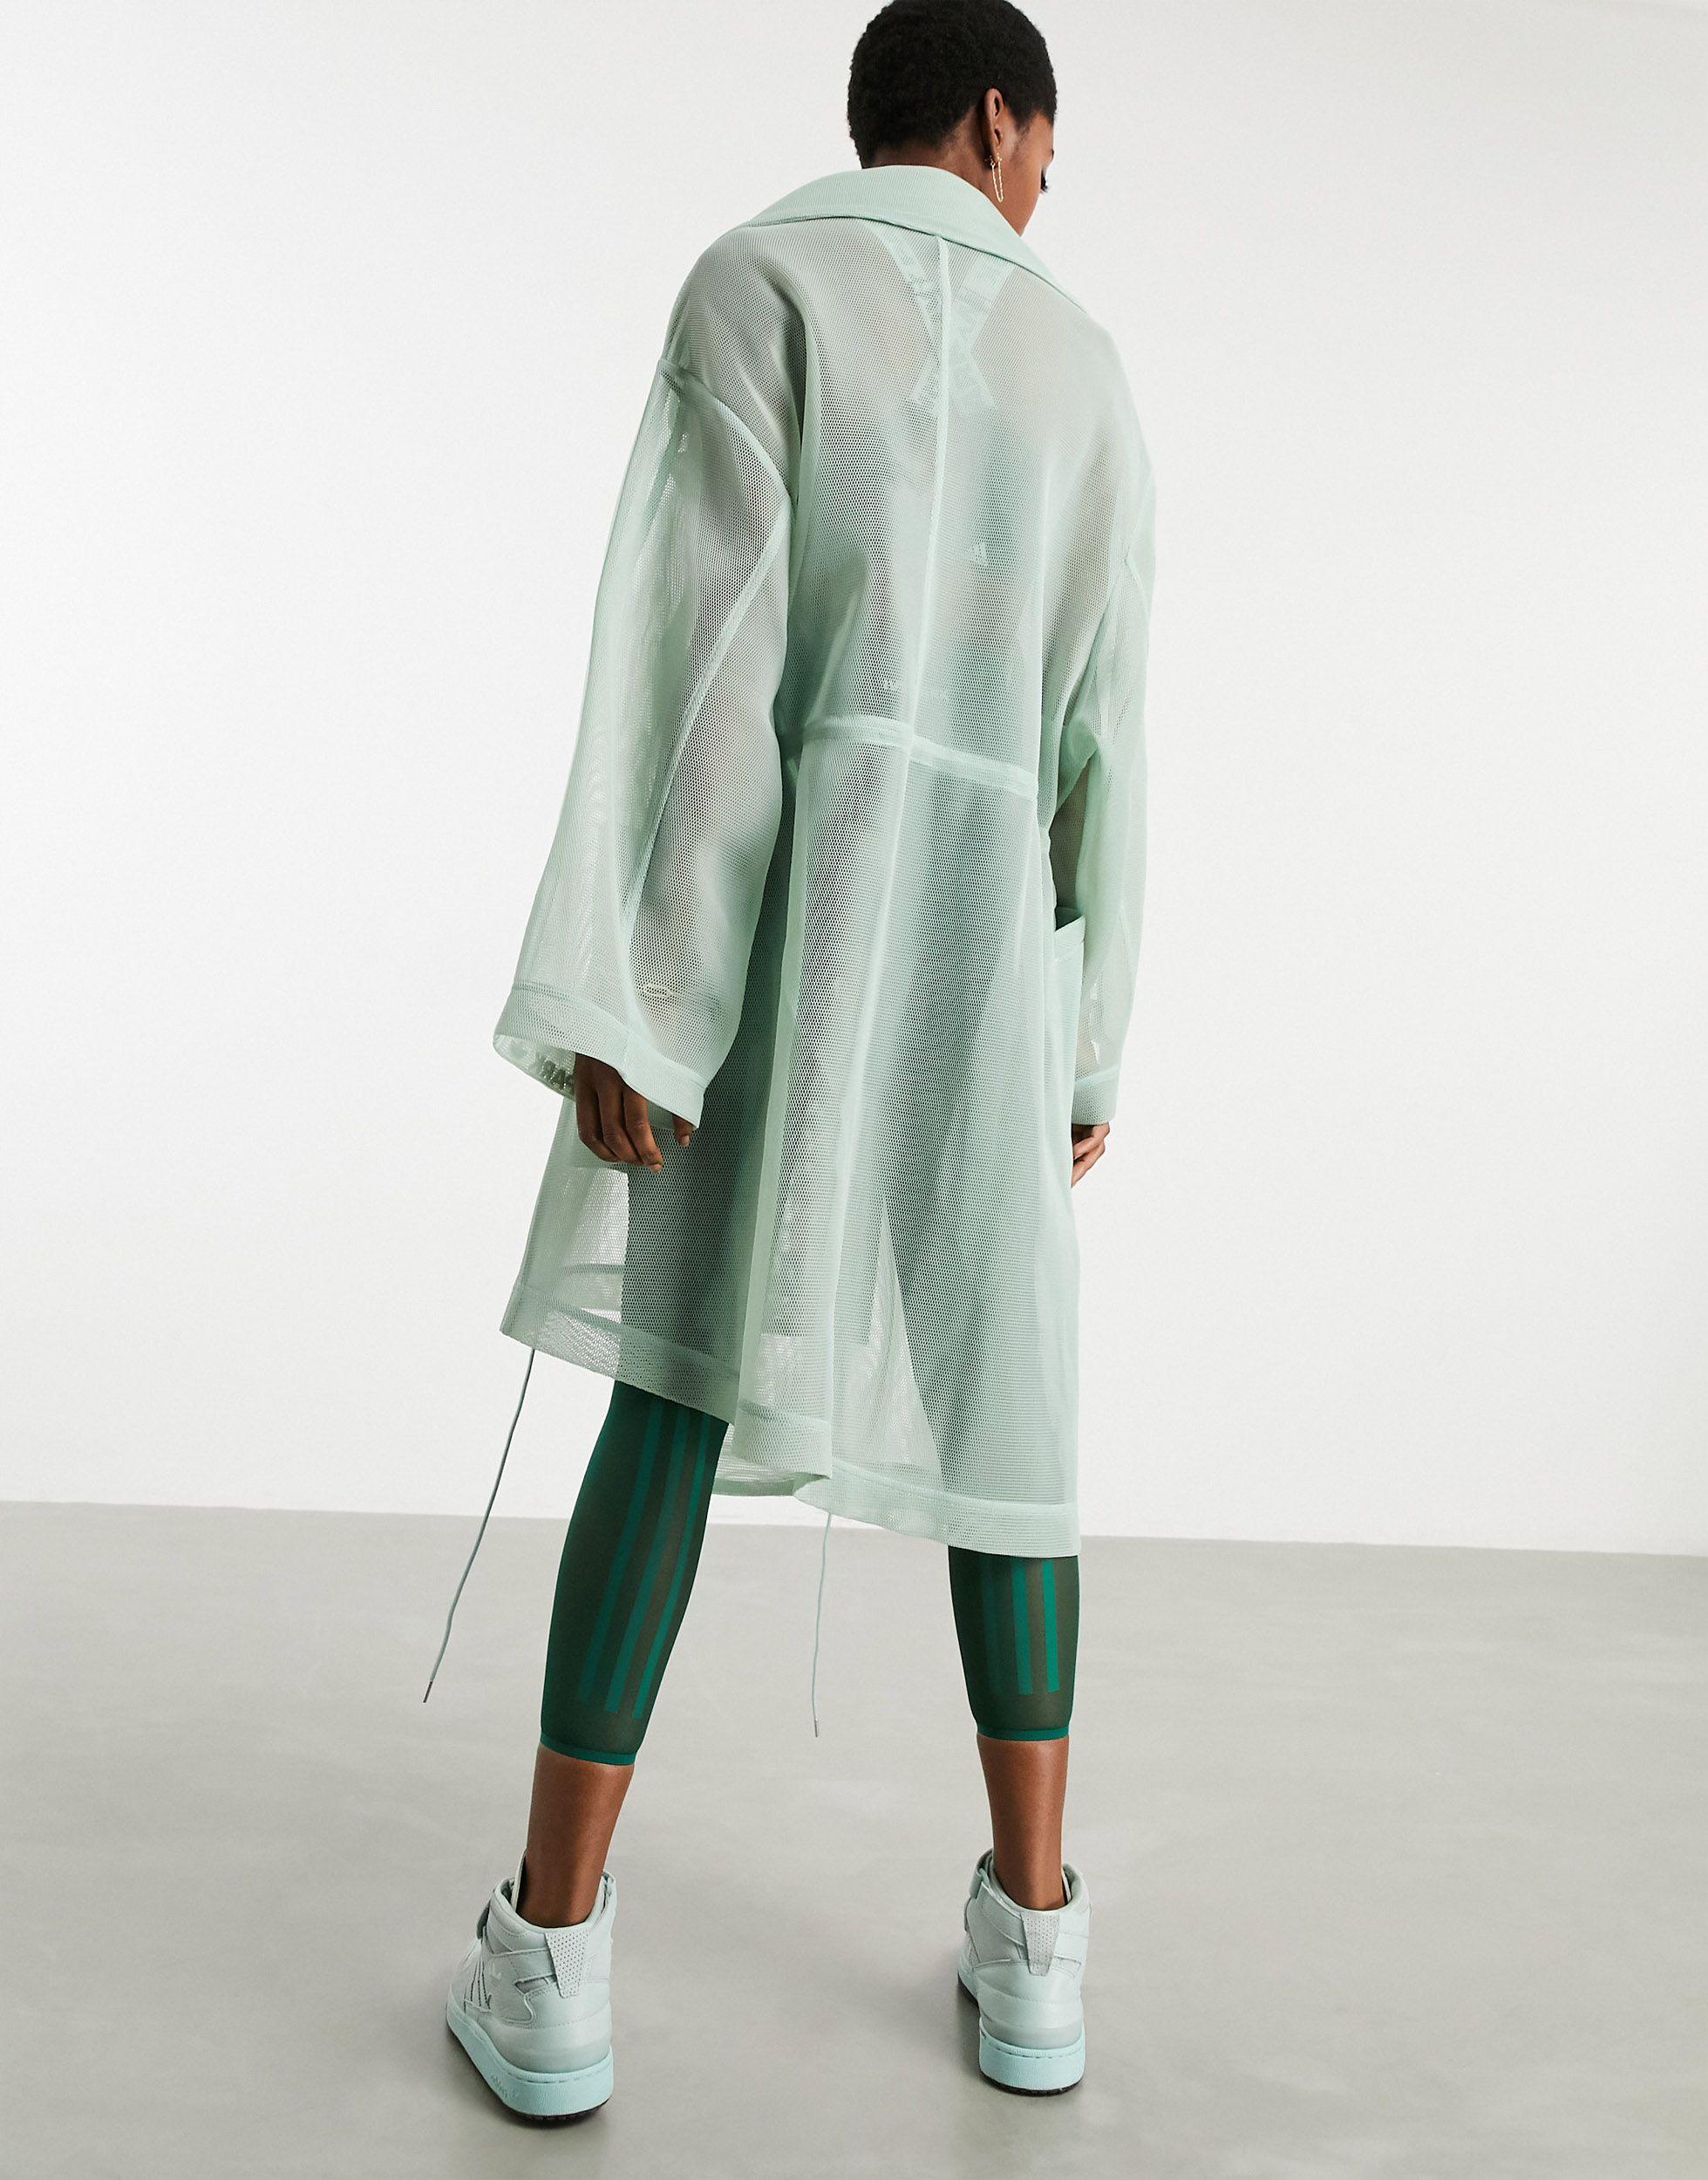 Ivy Park Adidas X Mesh Trench Coat in Green | Lyst